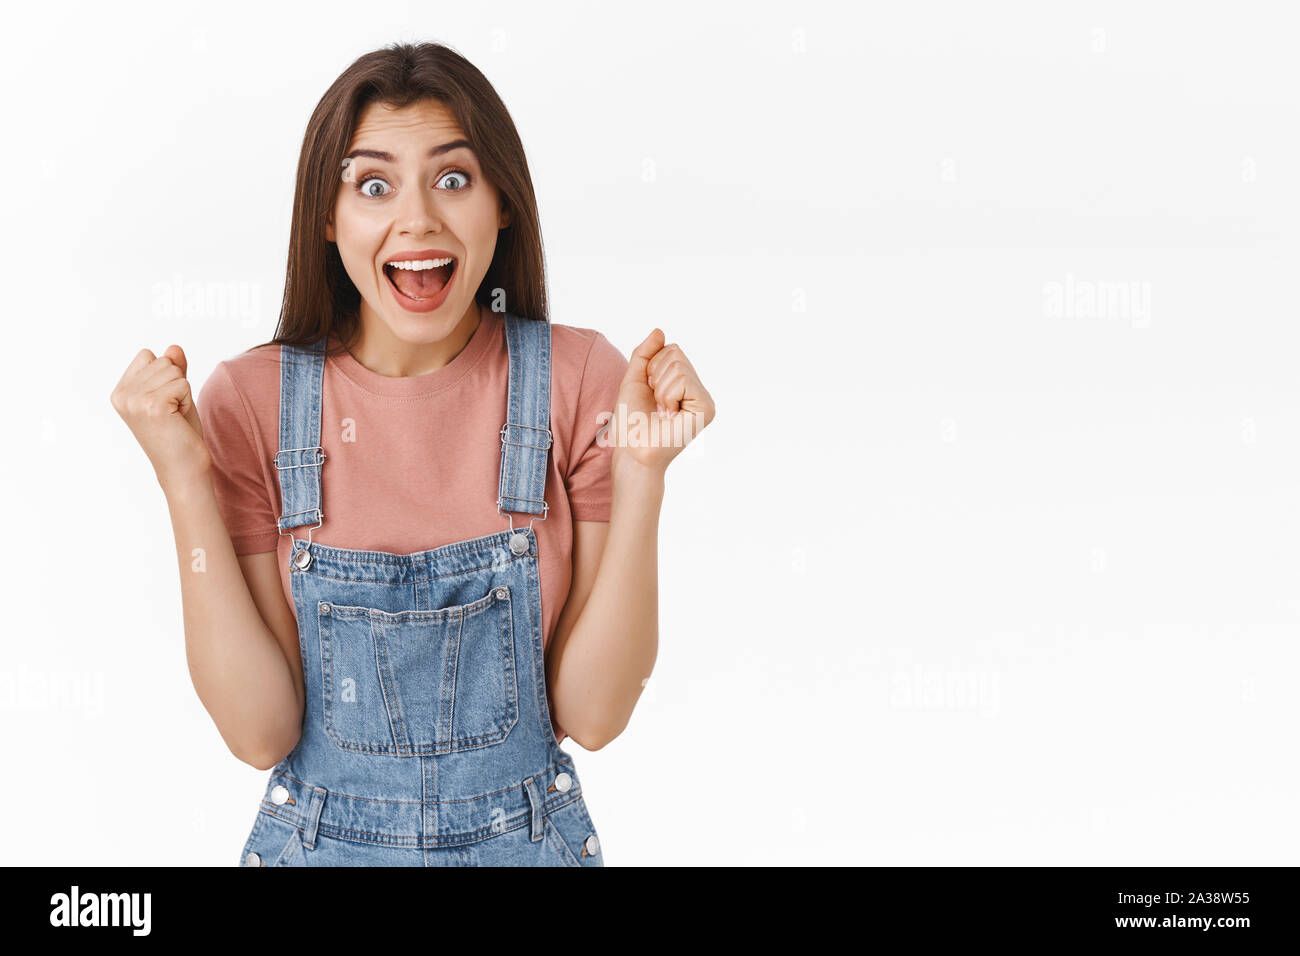 Cheerful, relieved attractive girl in overalls, lift hands up in cheer and happiness, screaming in rejoice, triumphing receive amazing good news Stock Photo